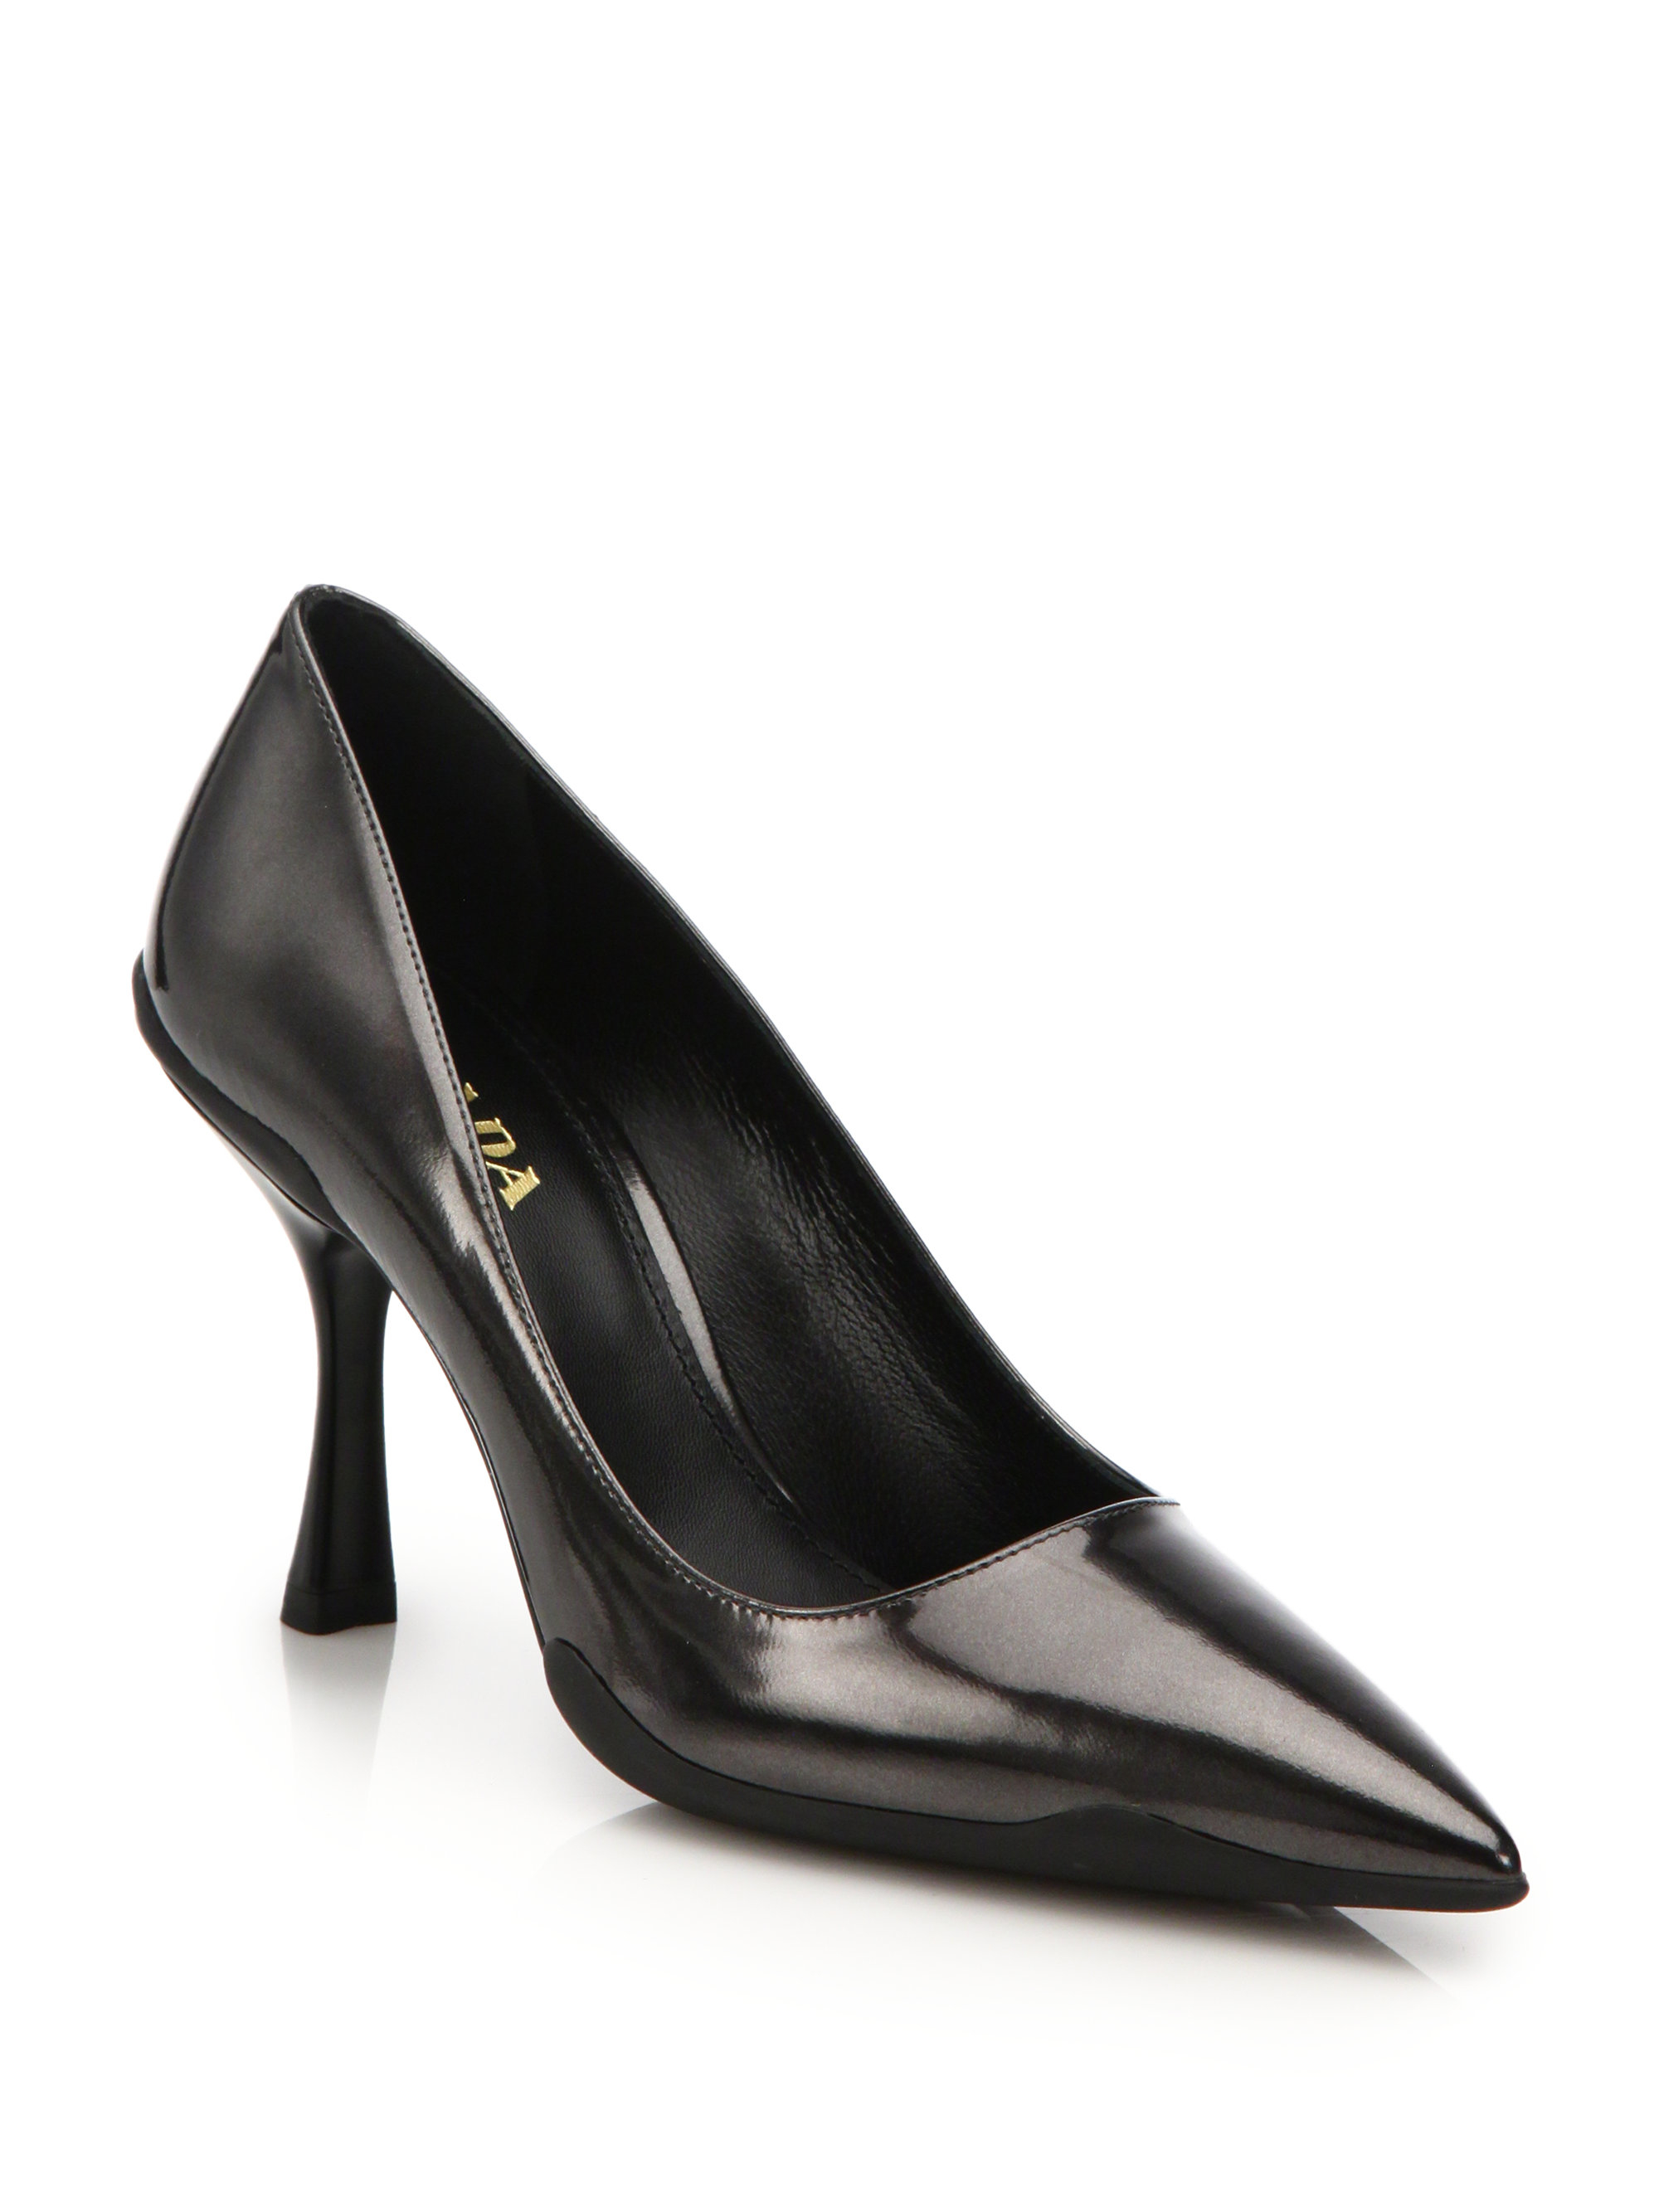 Prada Sport Sole Leather Pumps in Gray (anthracite) | Lyst  